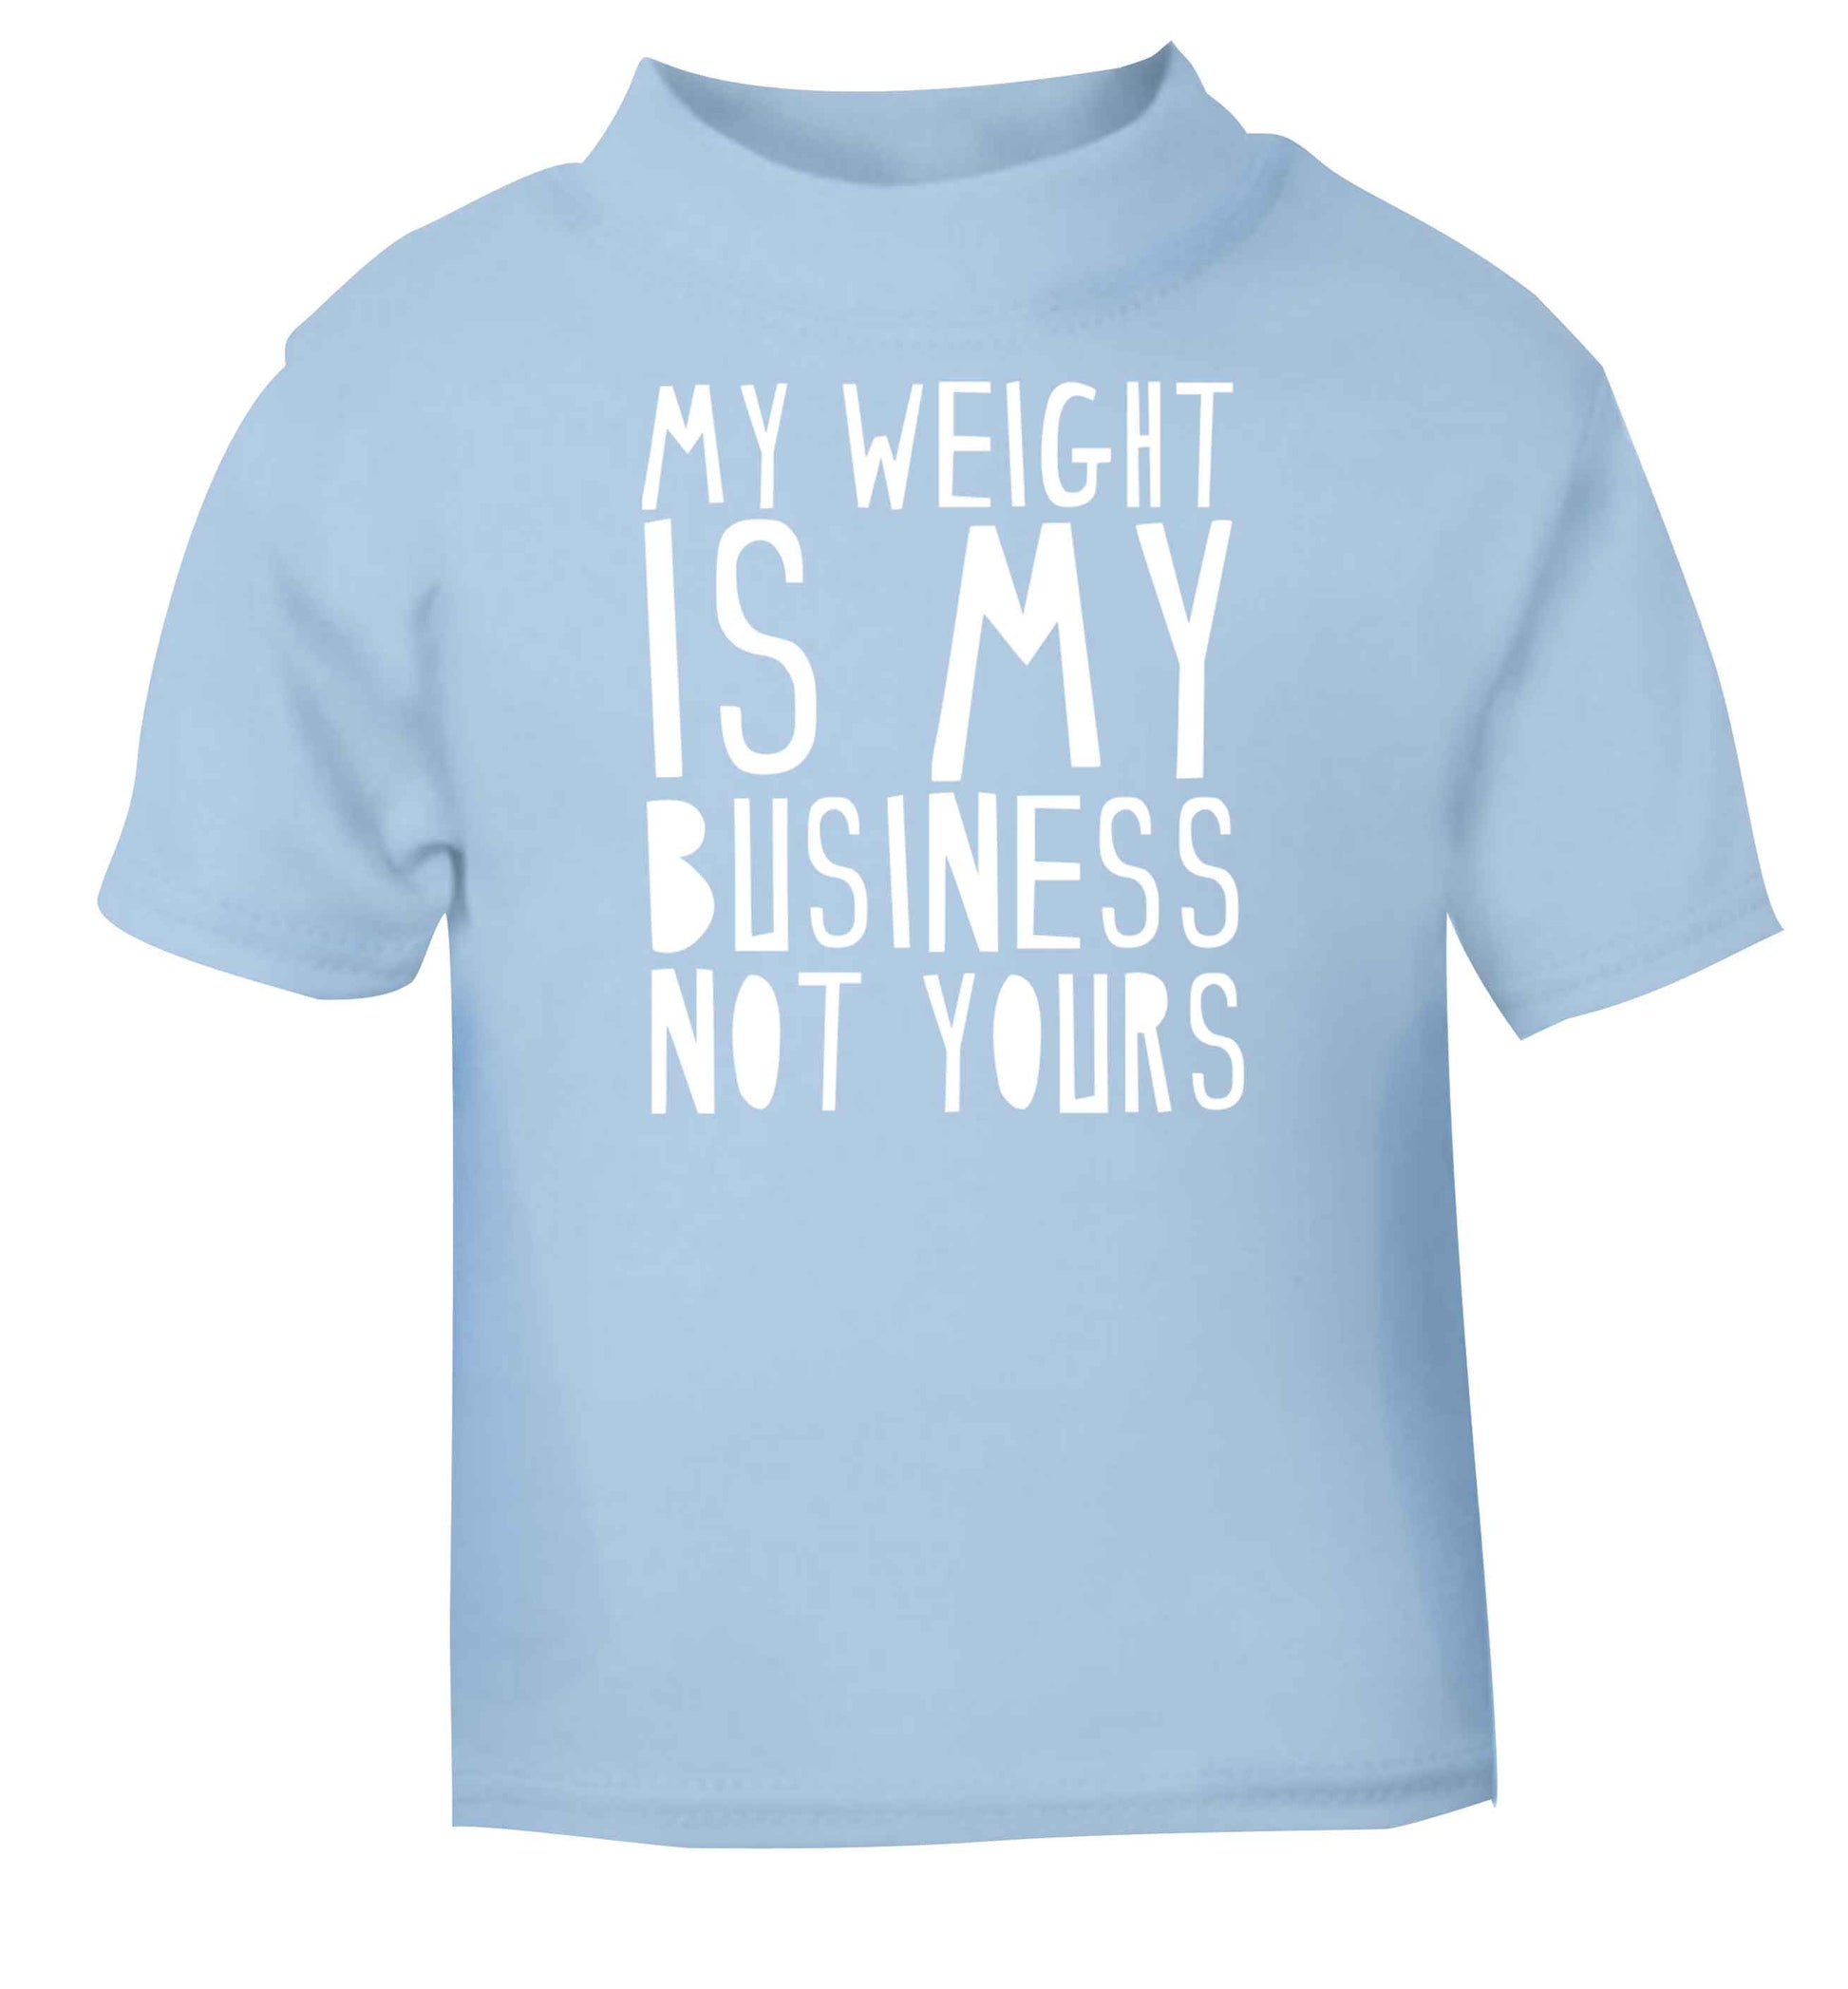 My weight is my business not yours light blue baby toddler Tshirt 2 Years